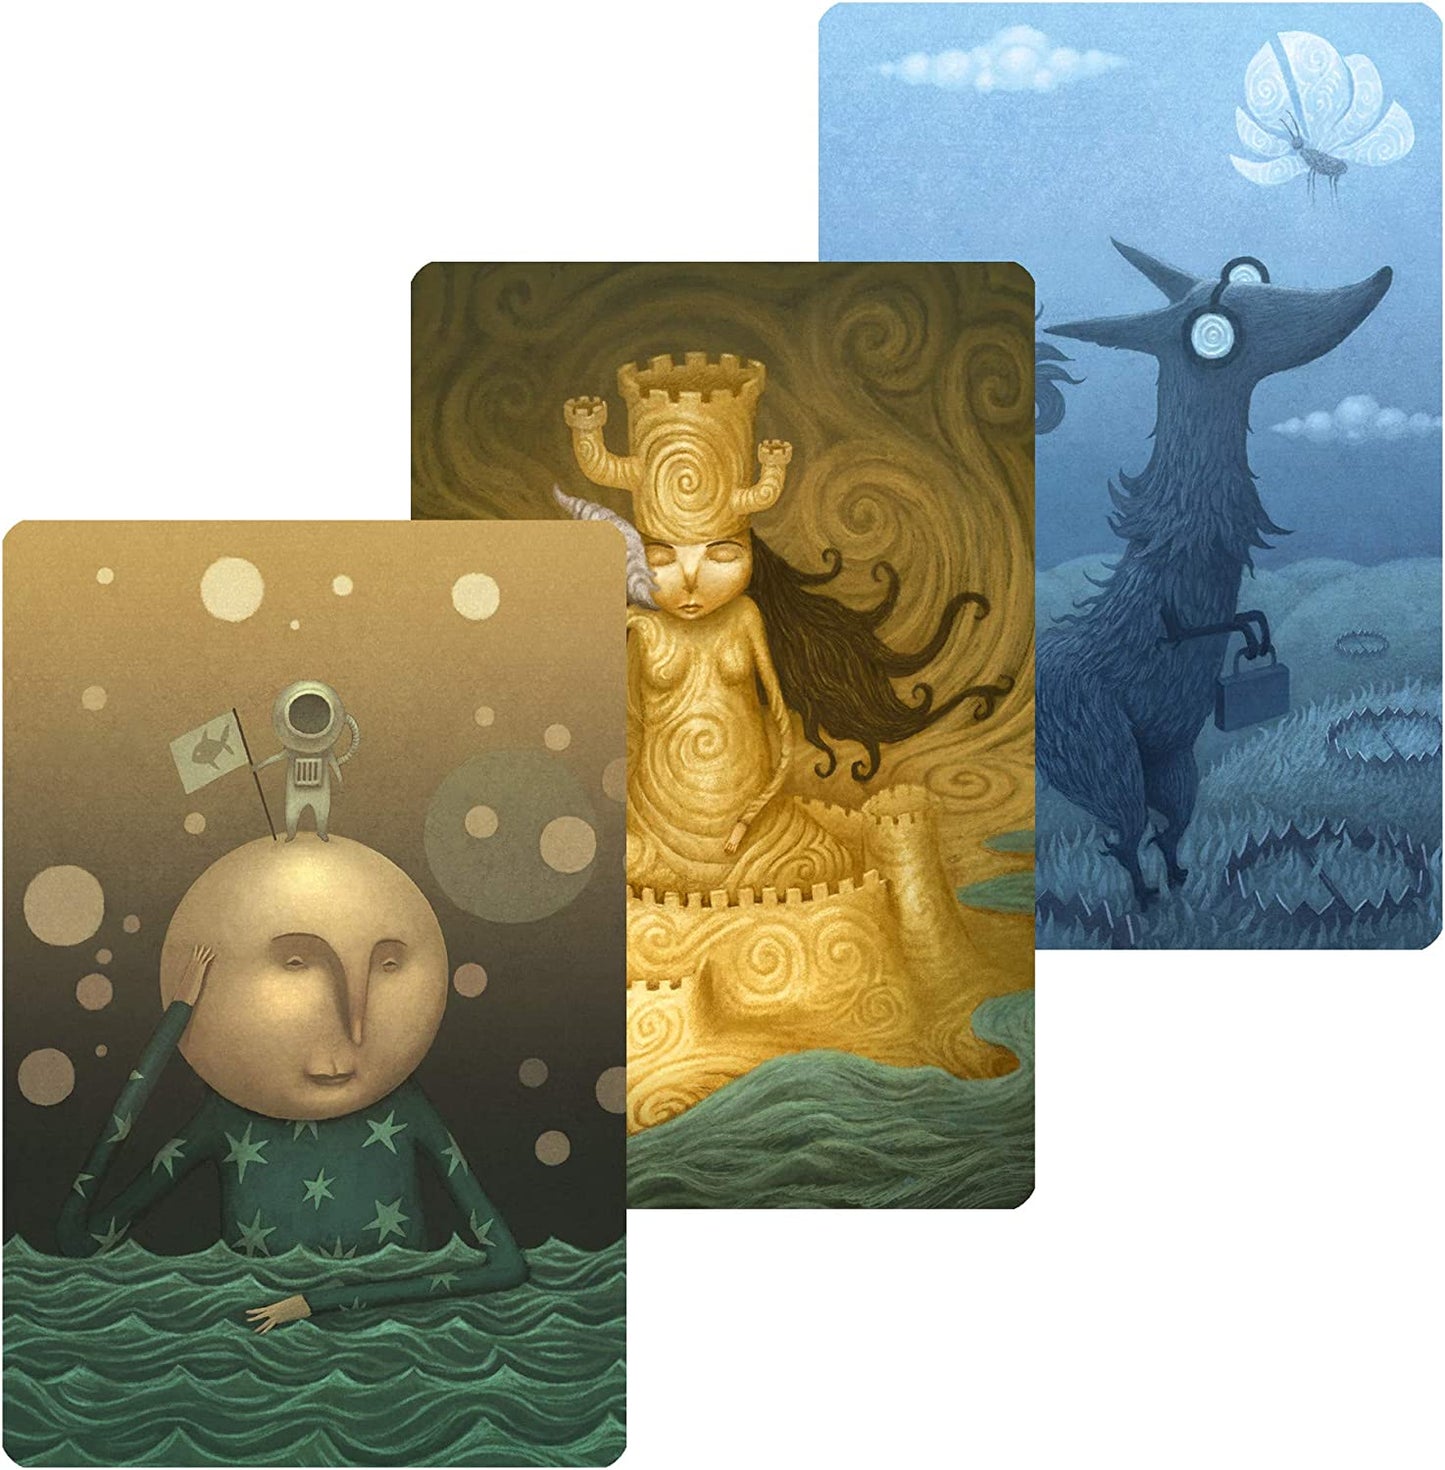 Dixit Expansion 5: Daydreams Libellud